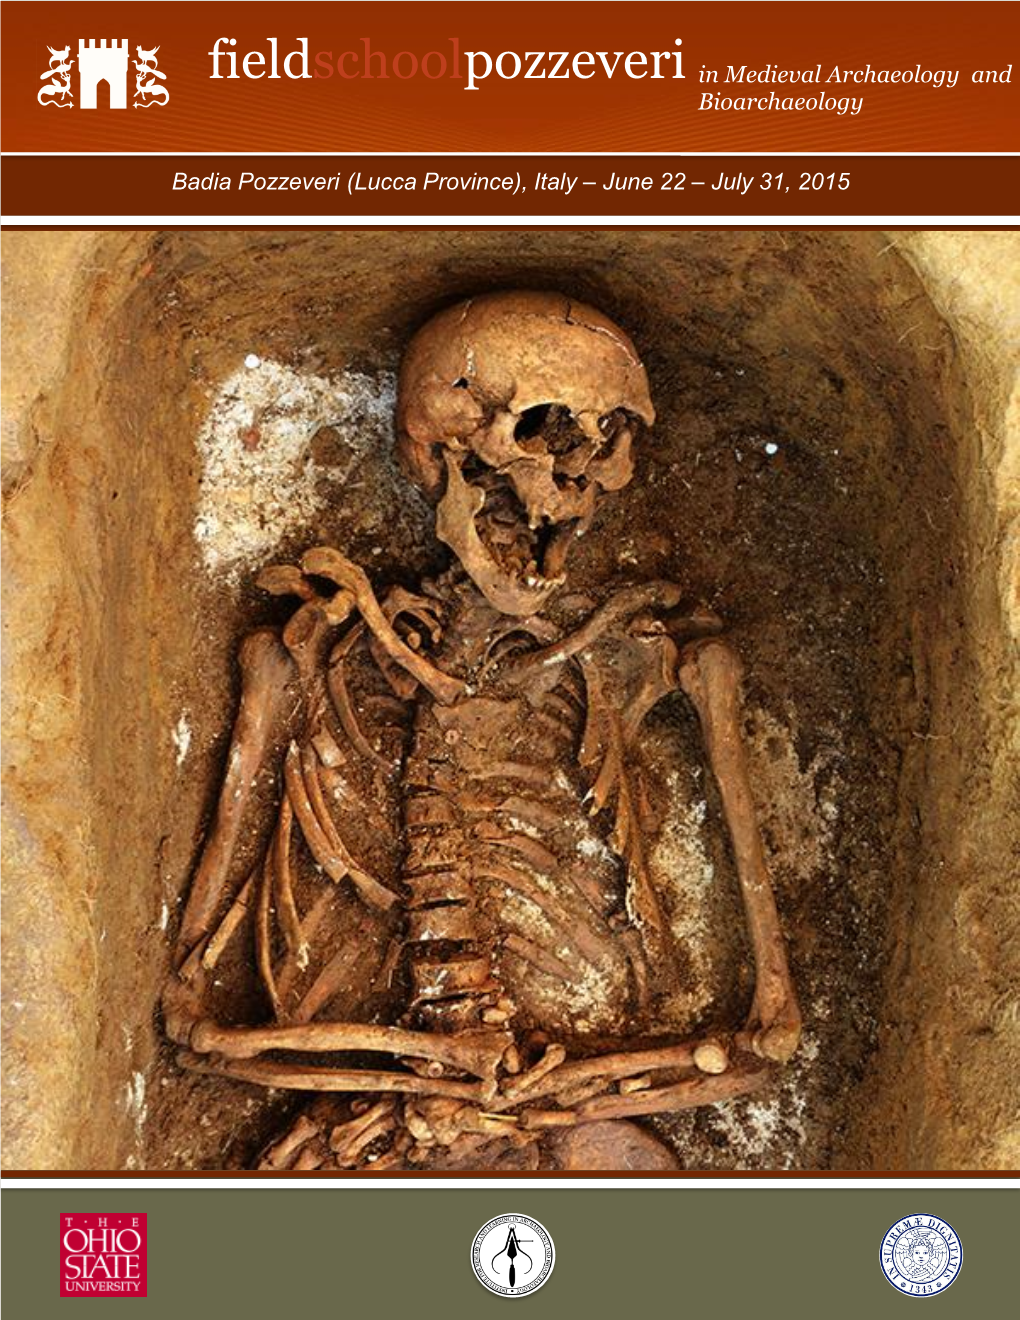 Fieldschoolpozzeveri in Medieval Archaeology and Bioarchaeology